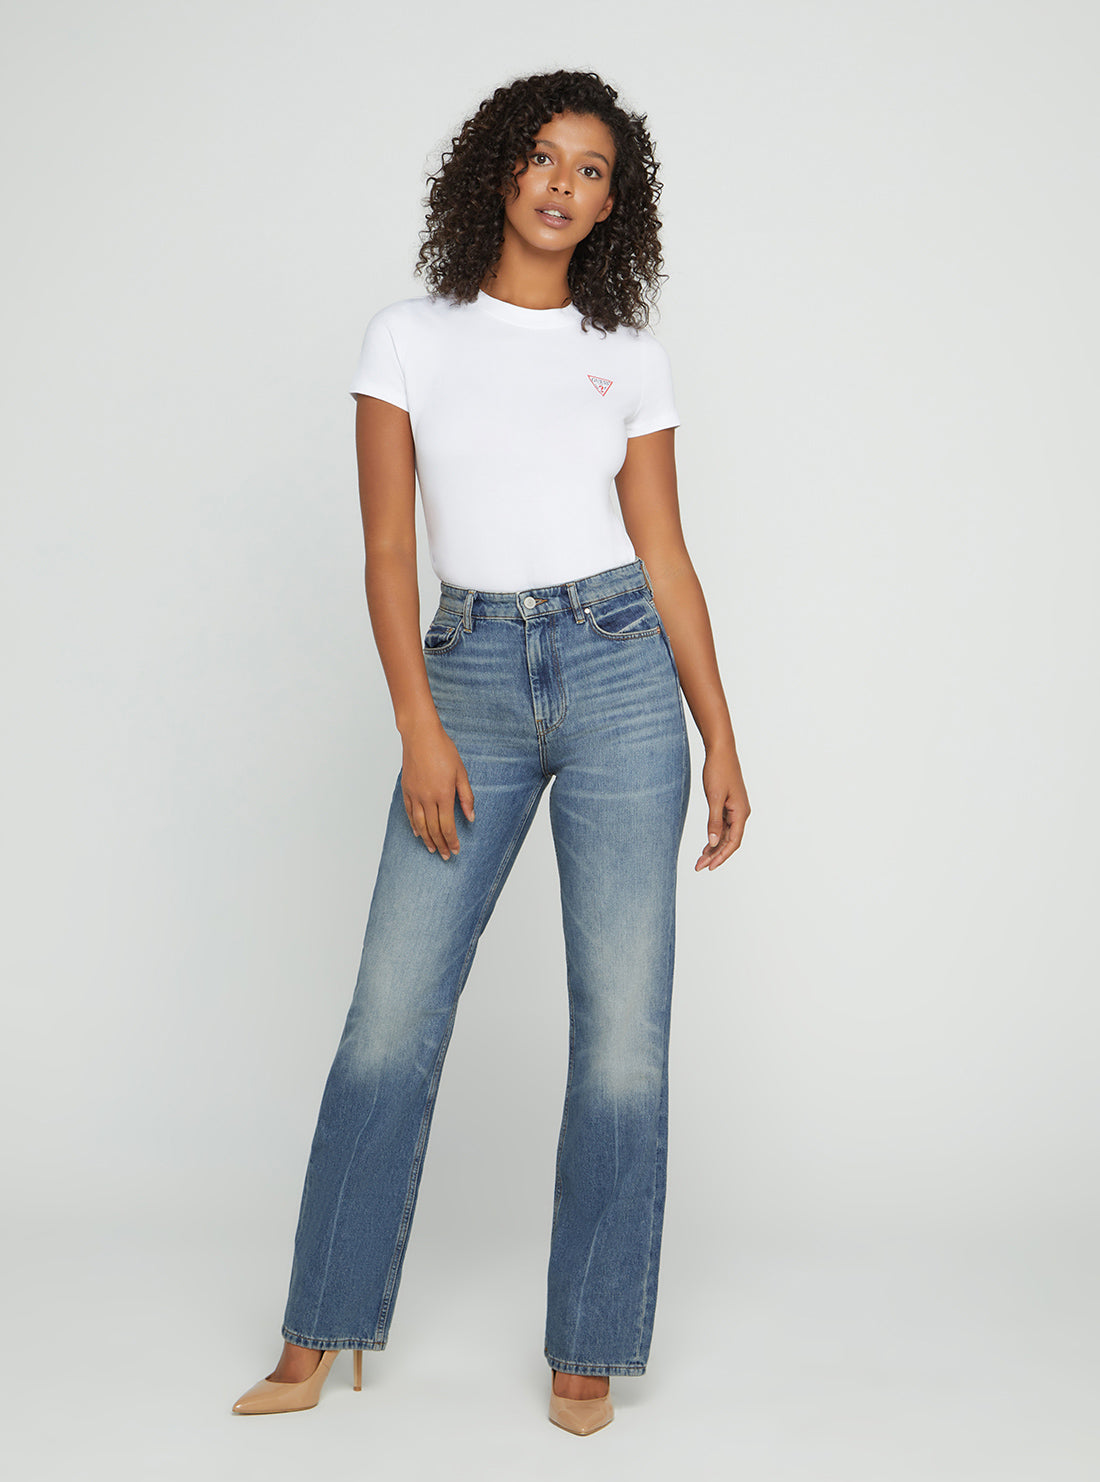 GUESS Women's High-Rise 80s Straight Leg Denim Jeans In Confidence Wash Pose View